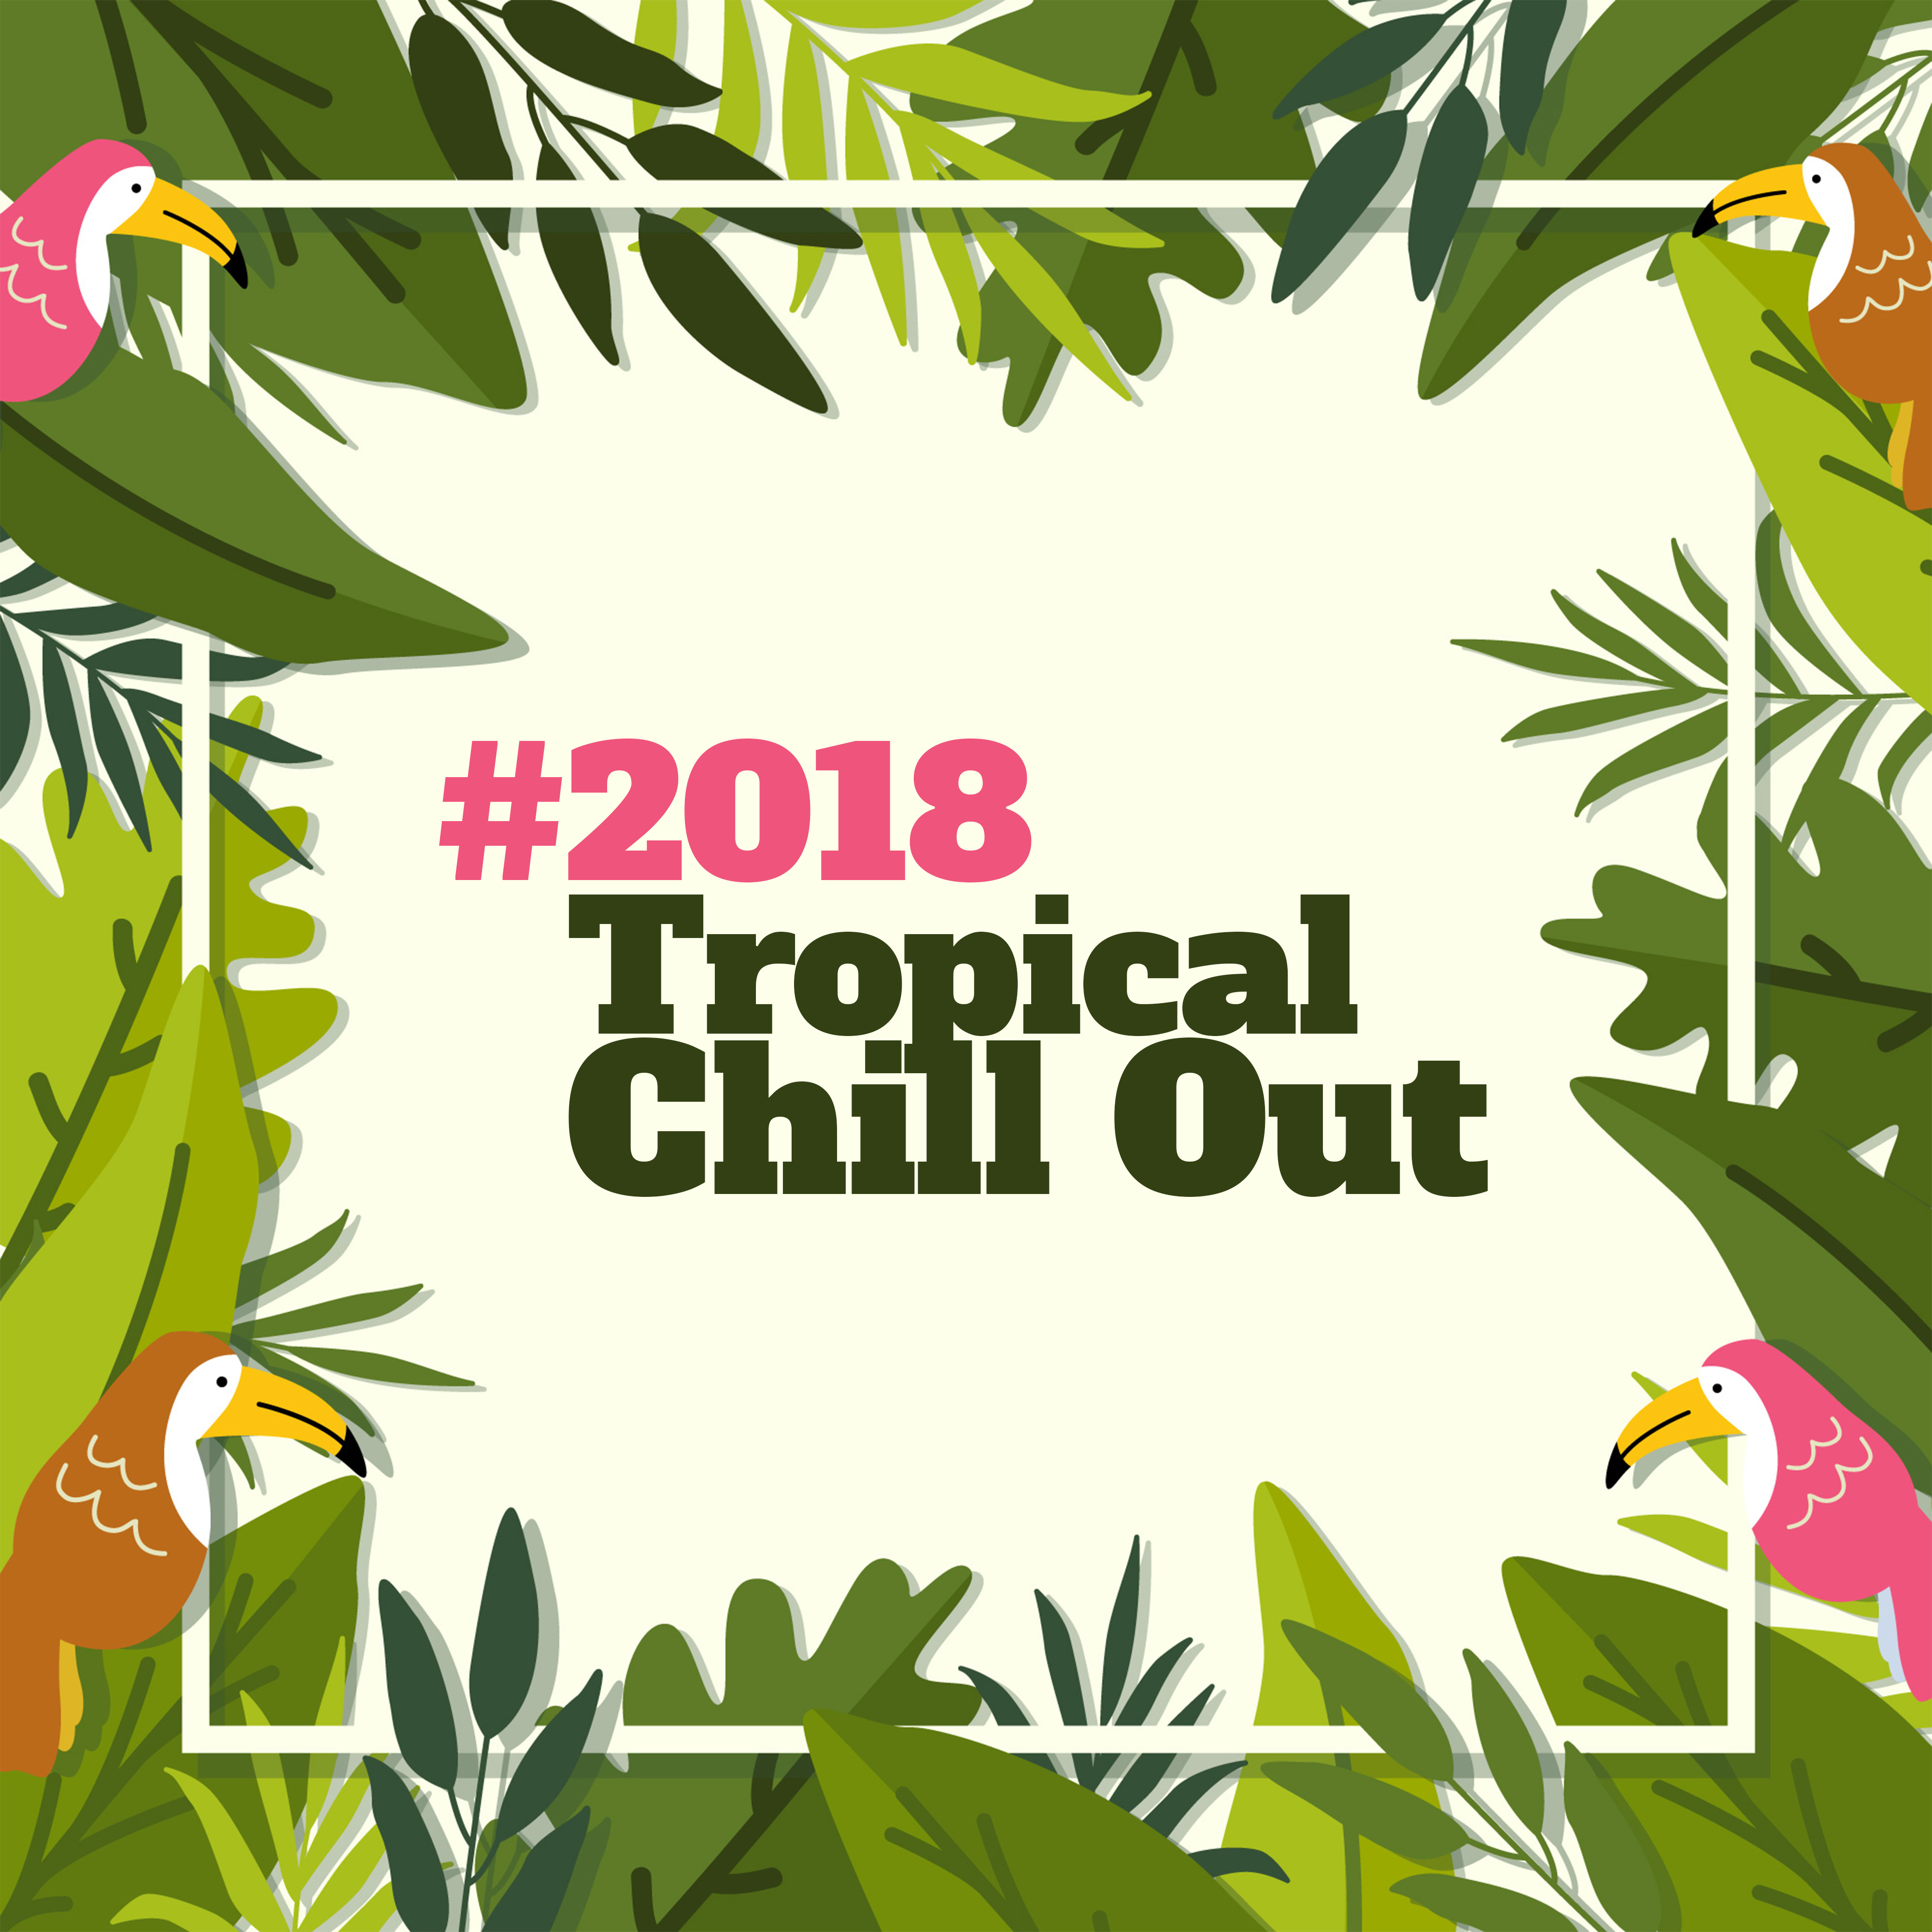 #2018 Tropical Chill Out